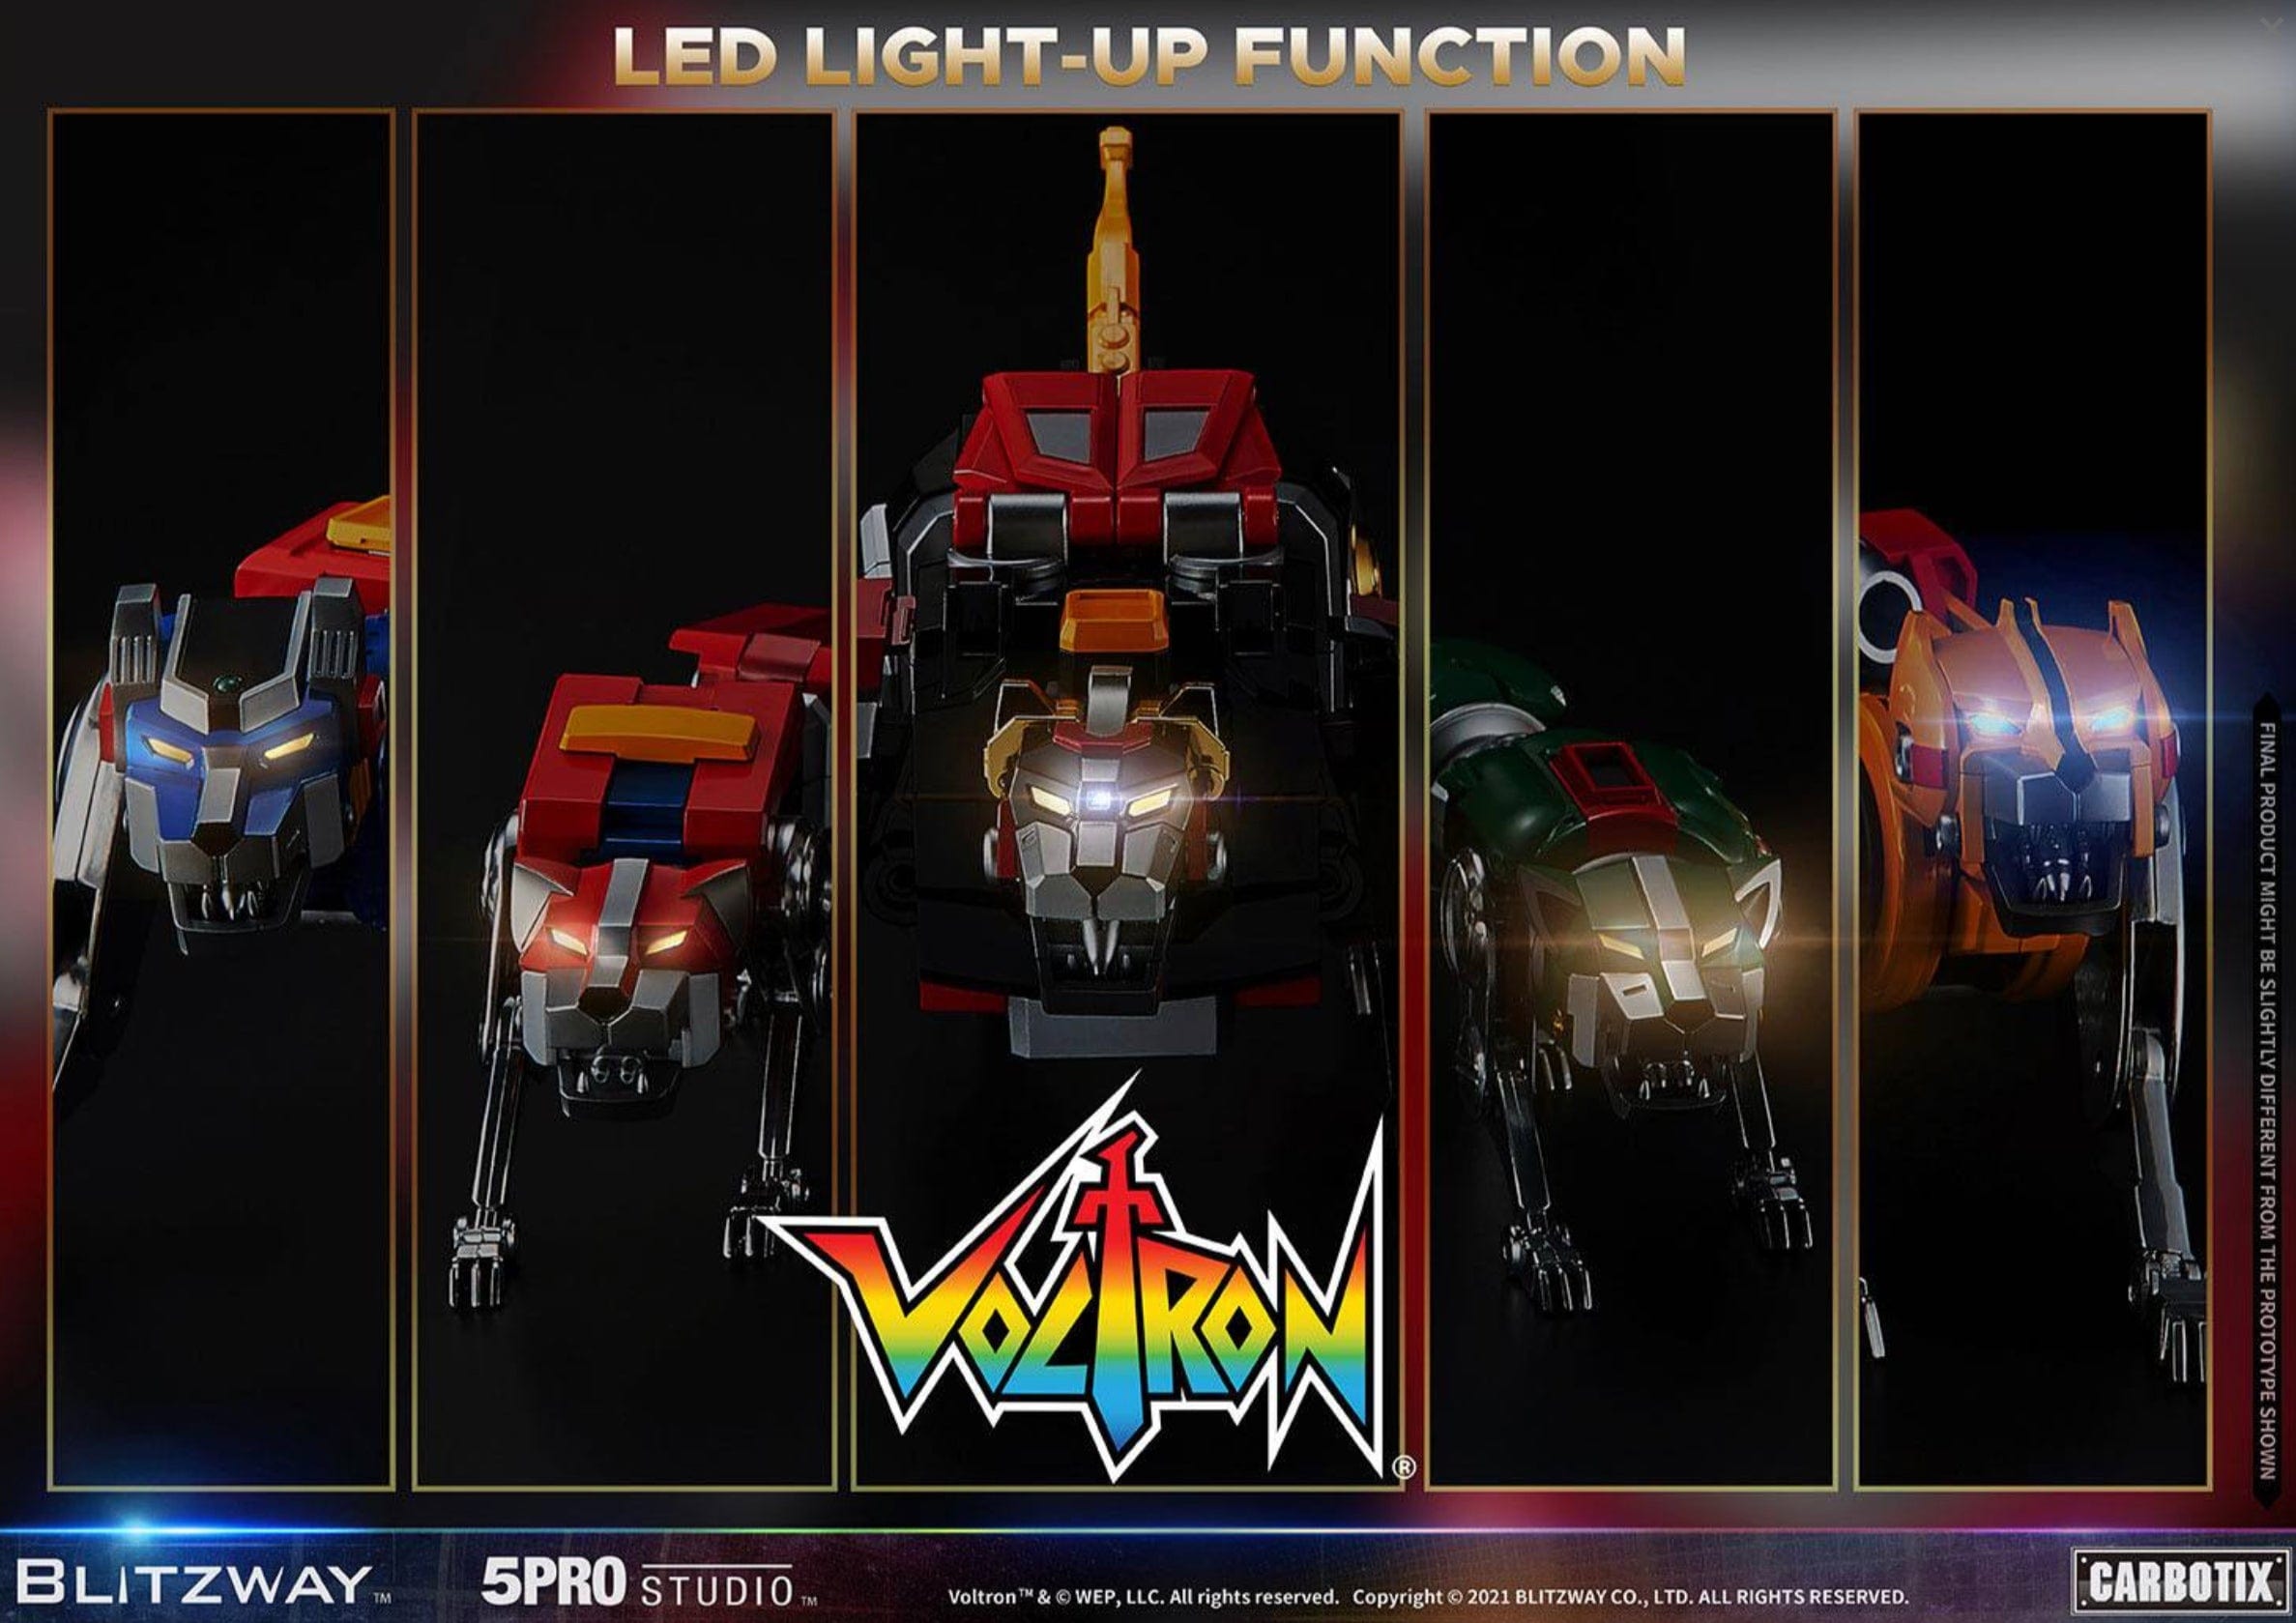 LED LIGHT-UP FUNCTION VOLTRON